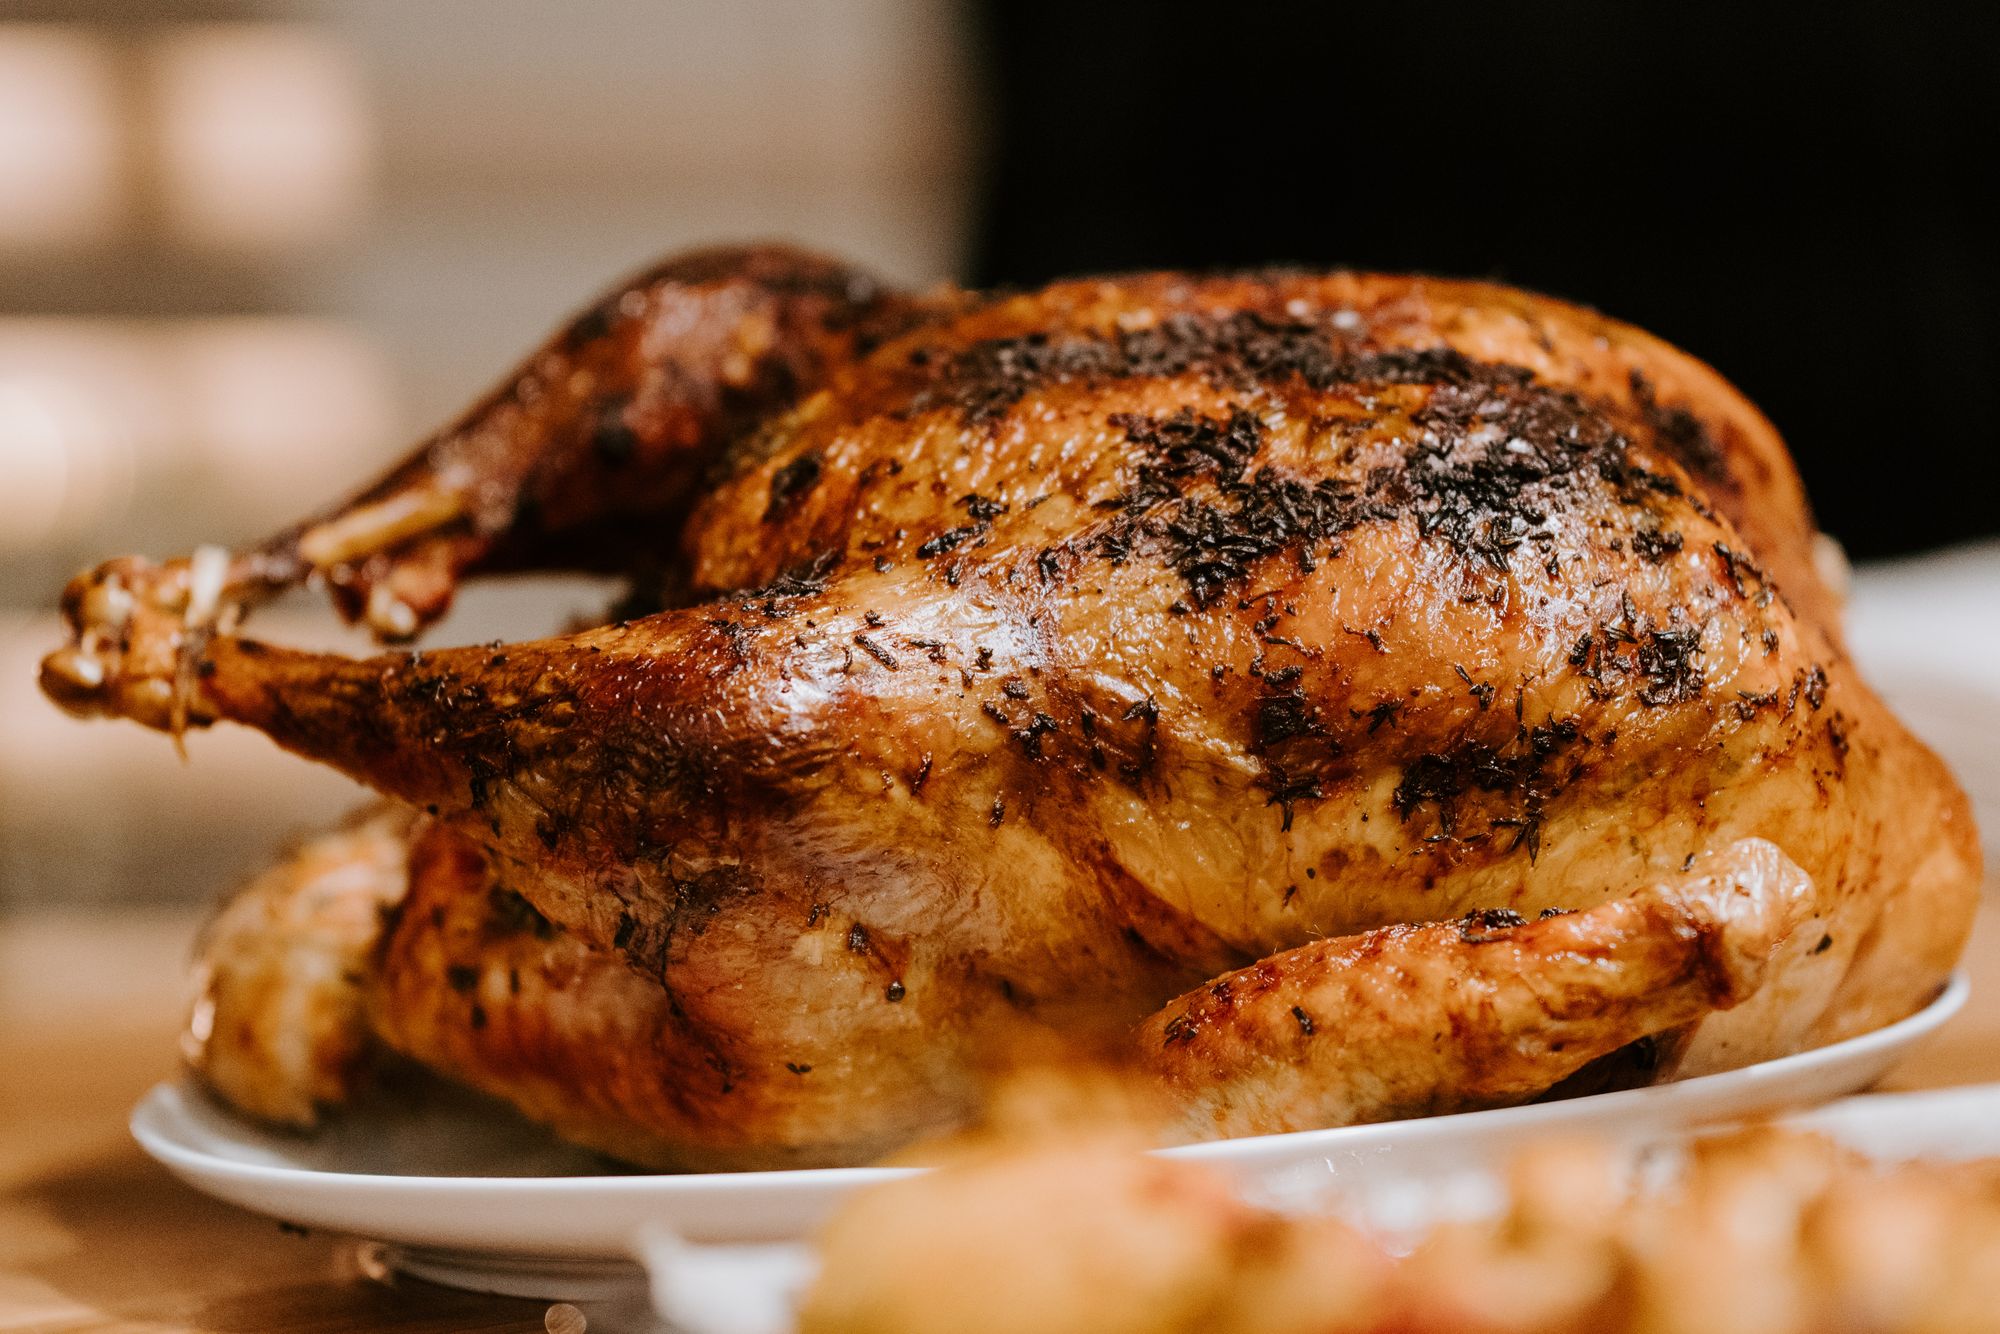 The Ty-Rade: Forget Santa Claus, don’t forget about the turkeys